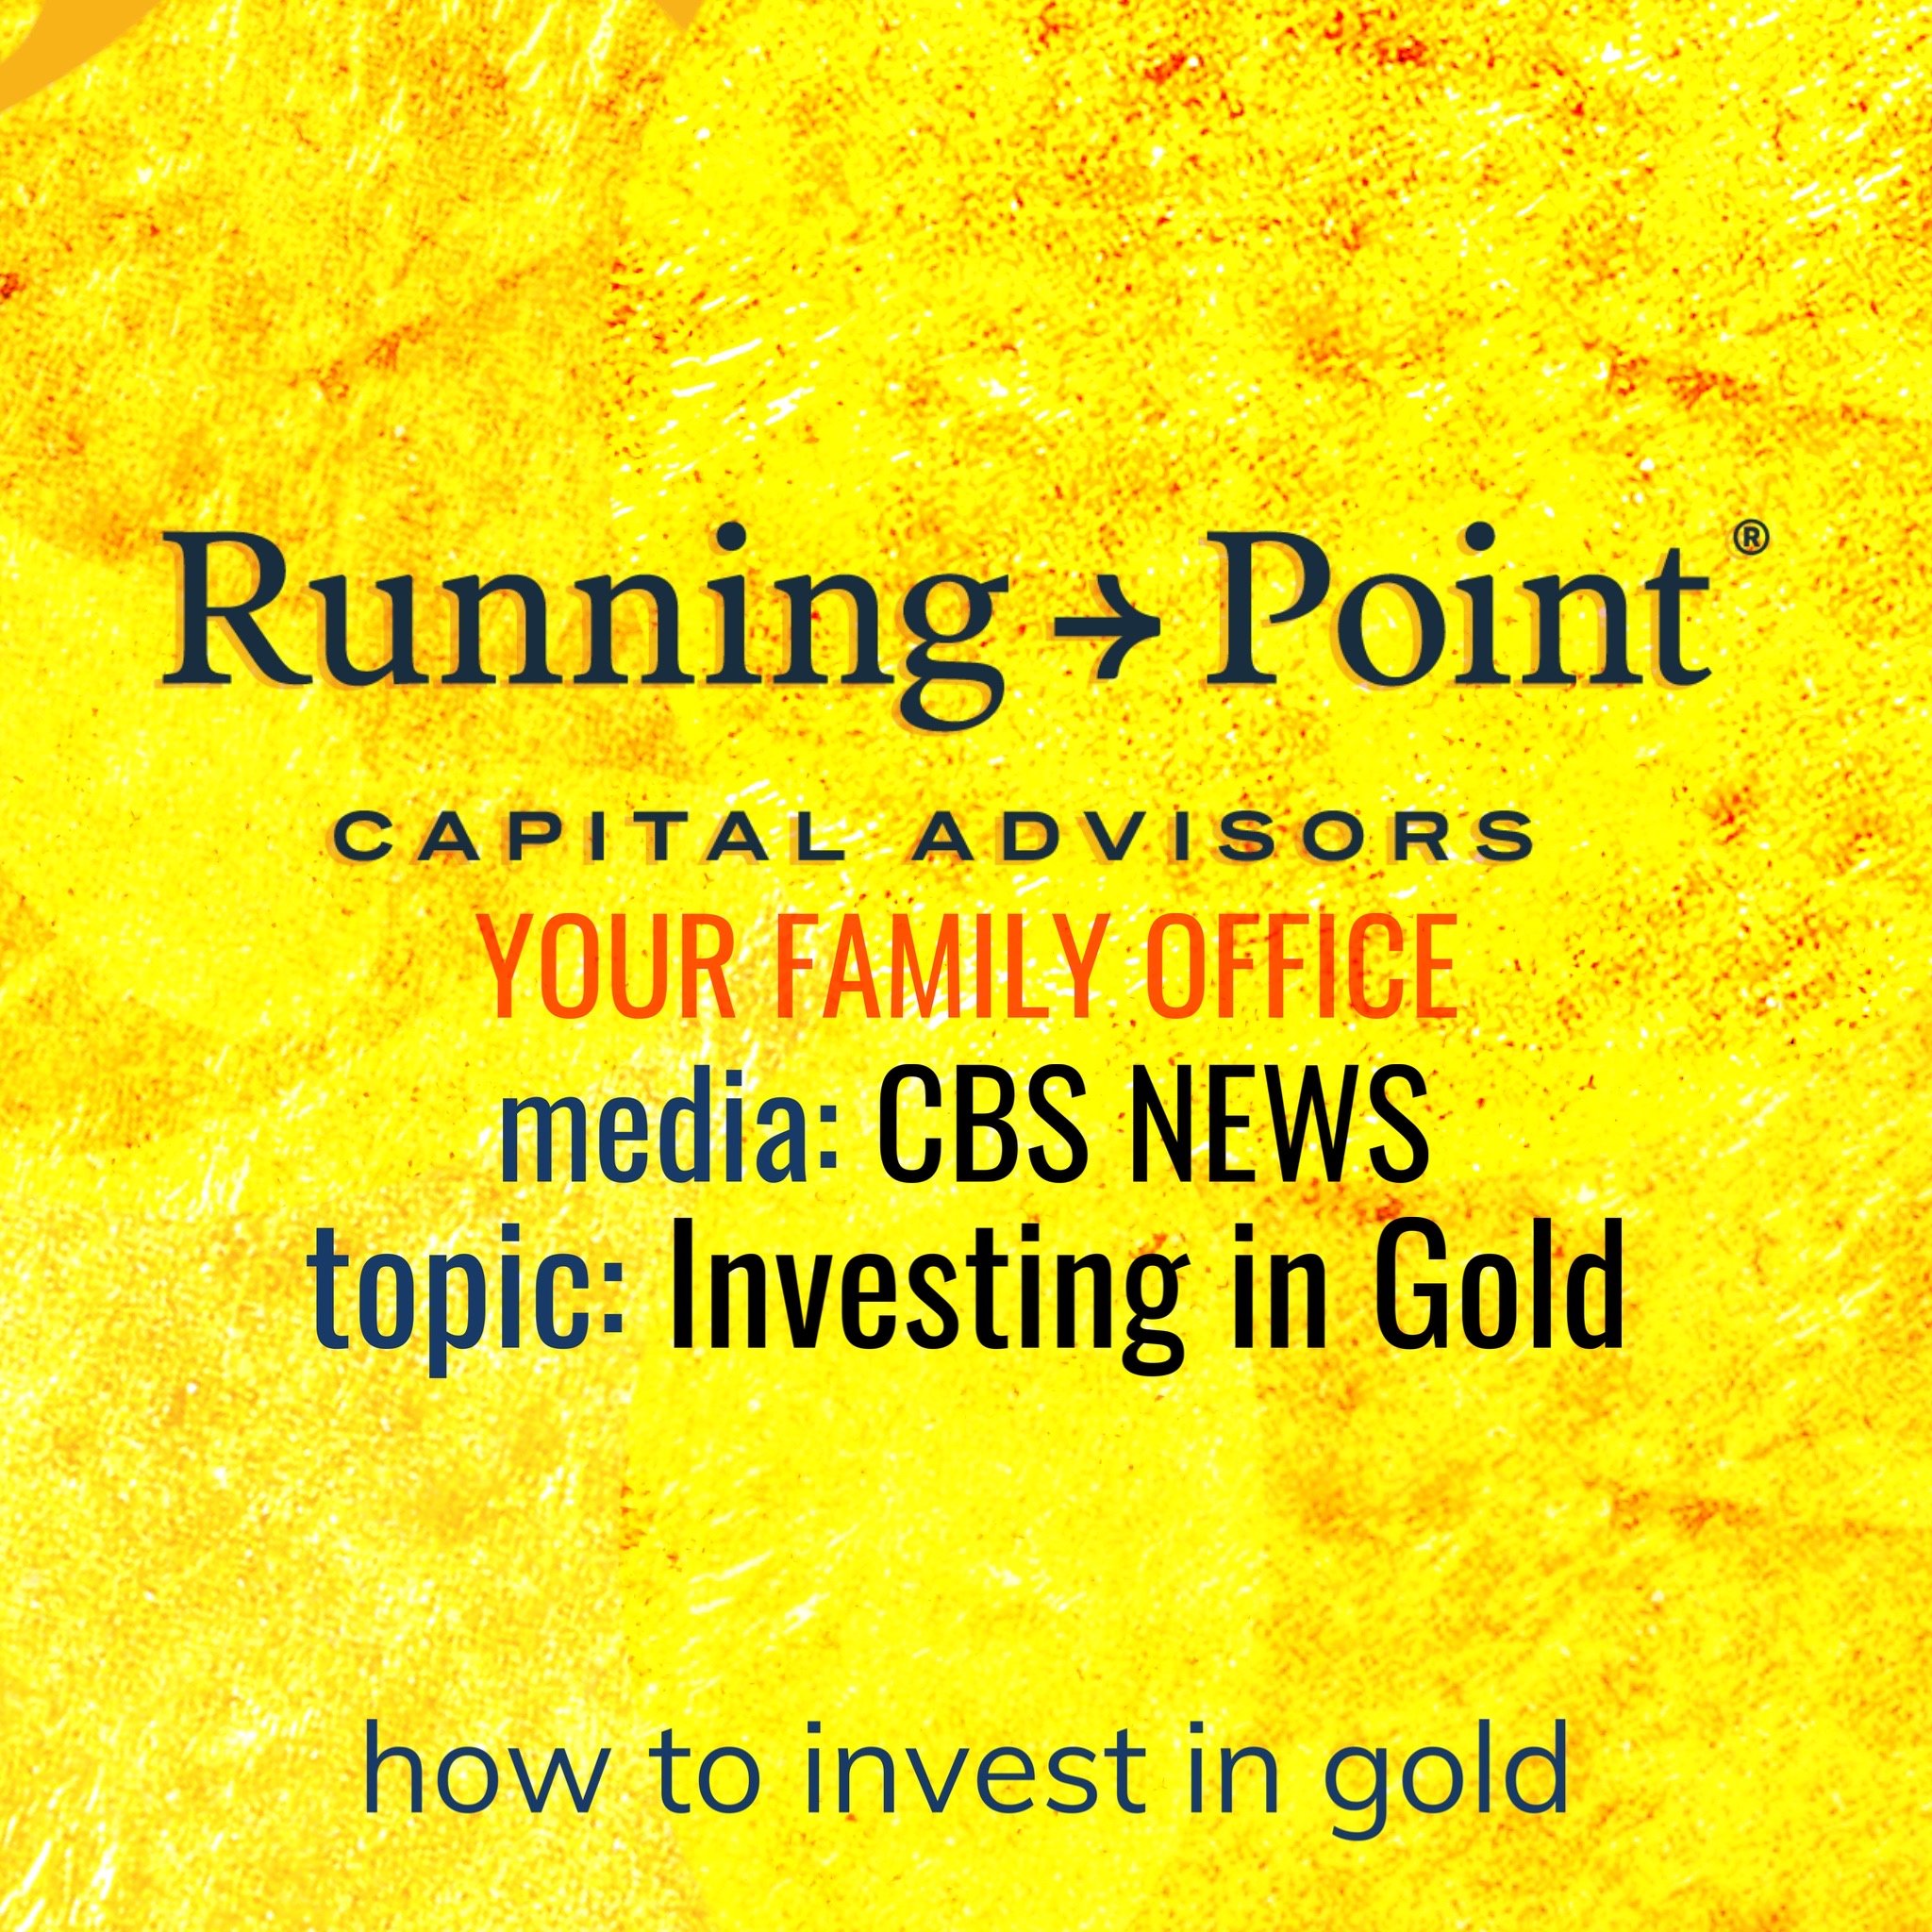 CBS News: How to invest in gold